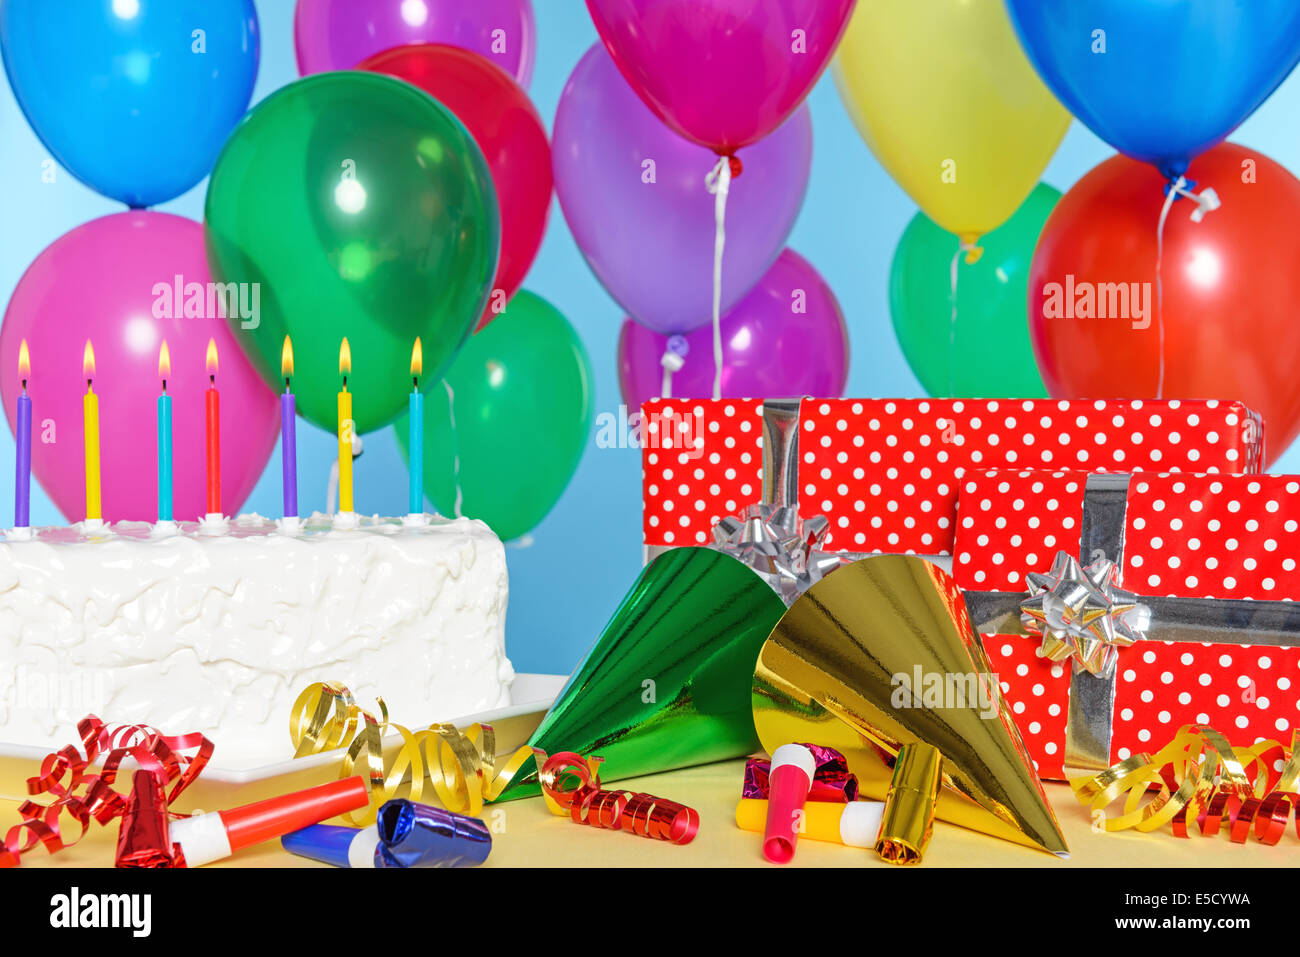 Birthday party still life with cake, balloons, presents, streamers and hats. Stock Photo